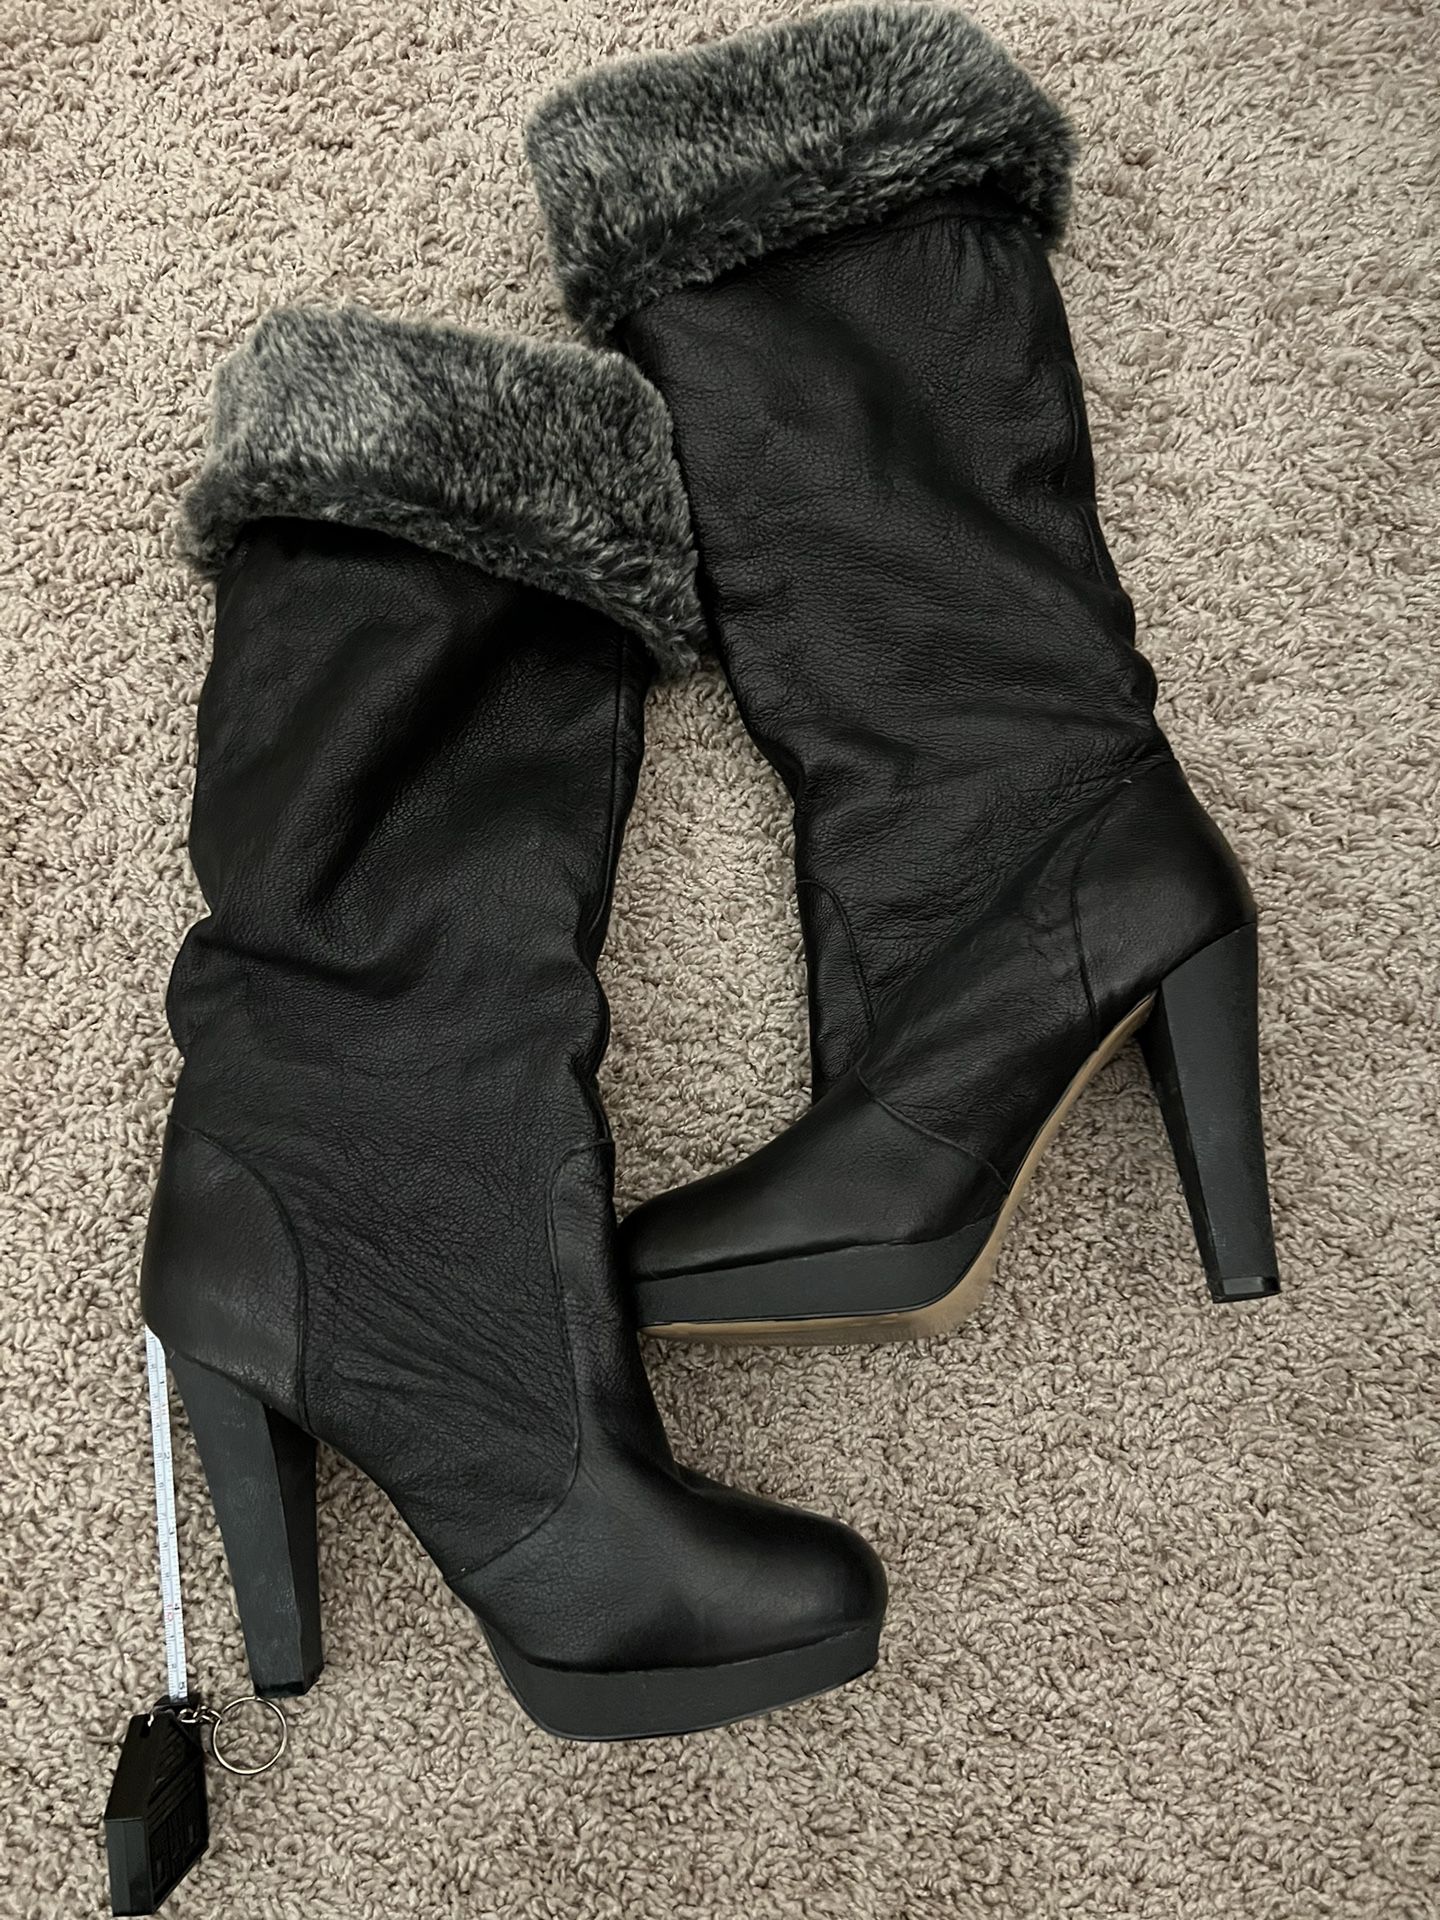 Fury Knee High Leather Boots Size 10